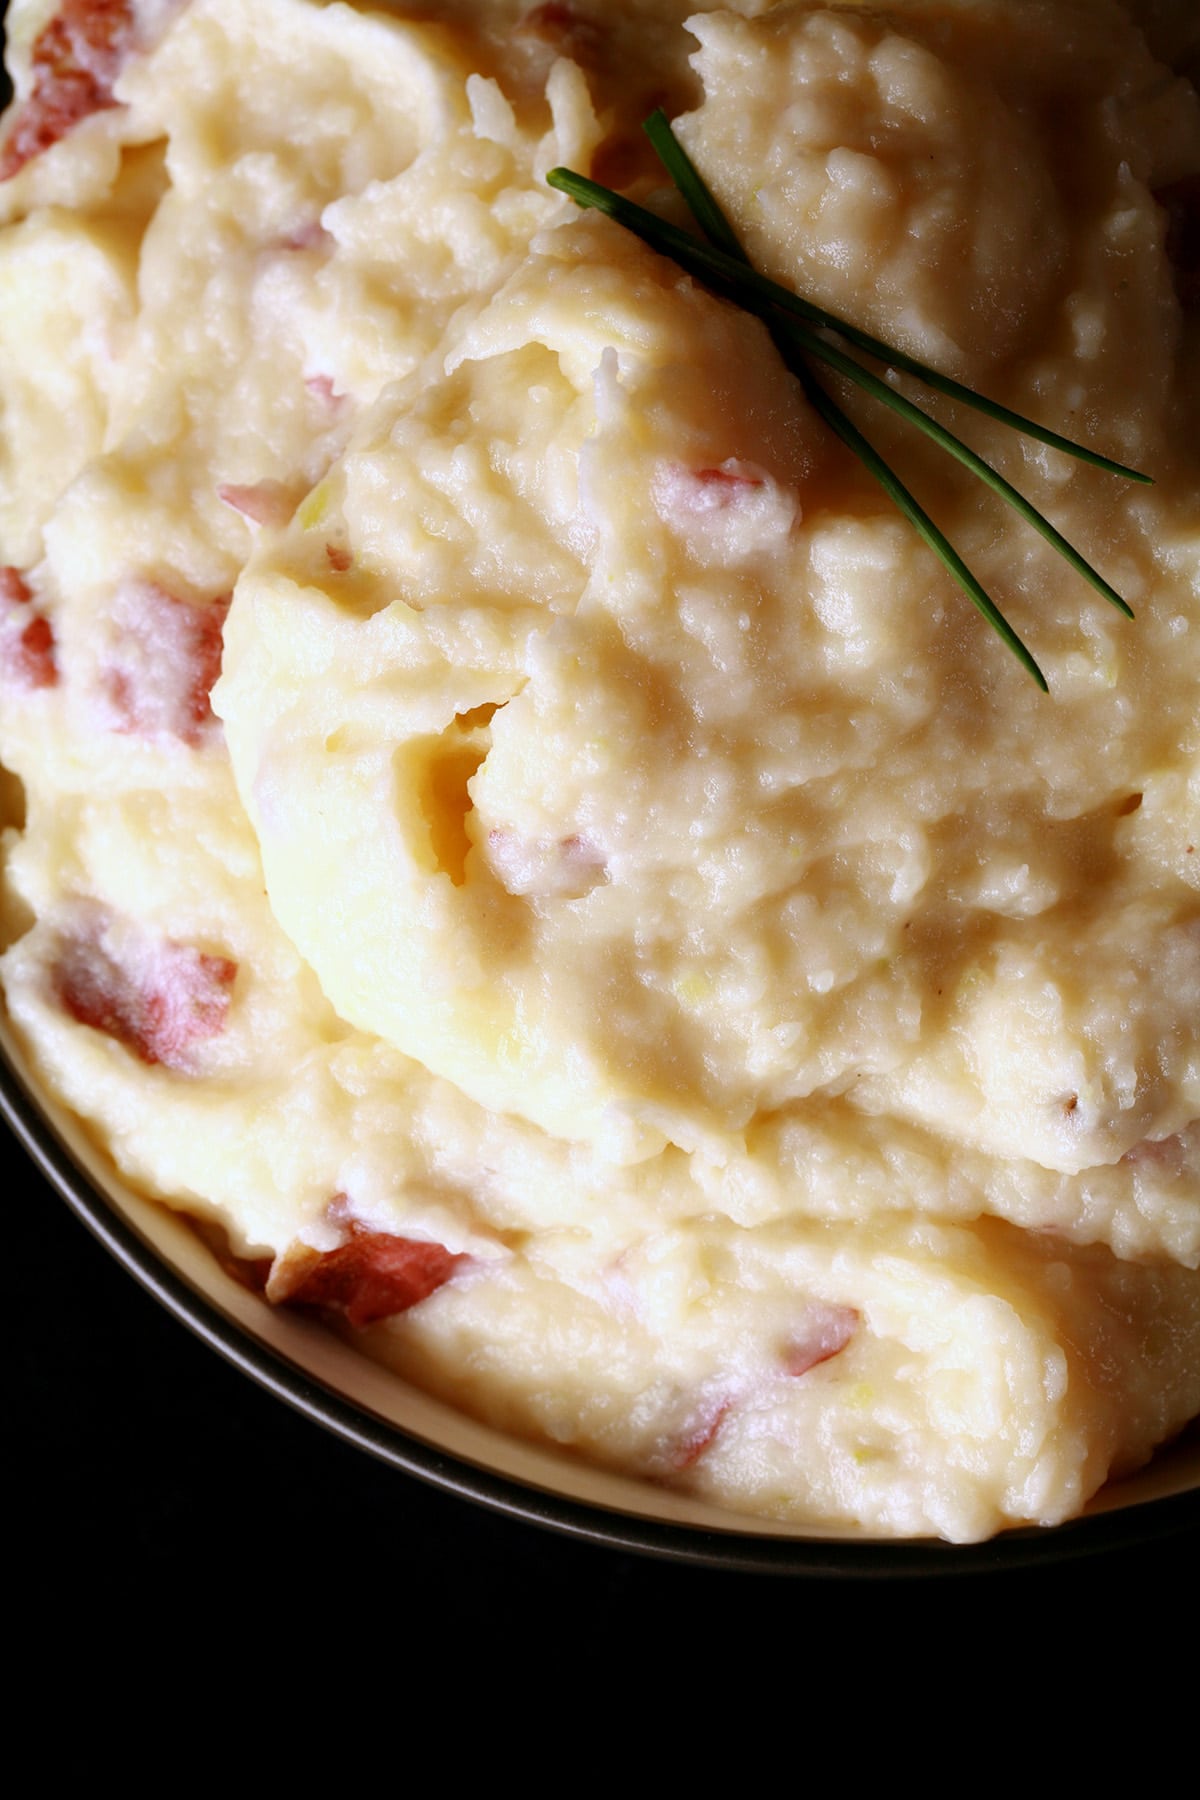 A close up photo of a bowl of gouda mashed potatoes. There are a few pieces of chives on top.